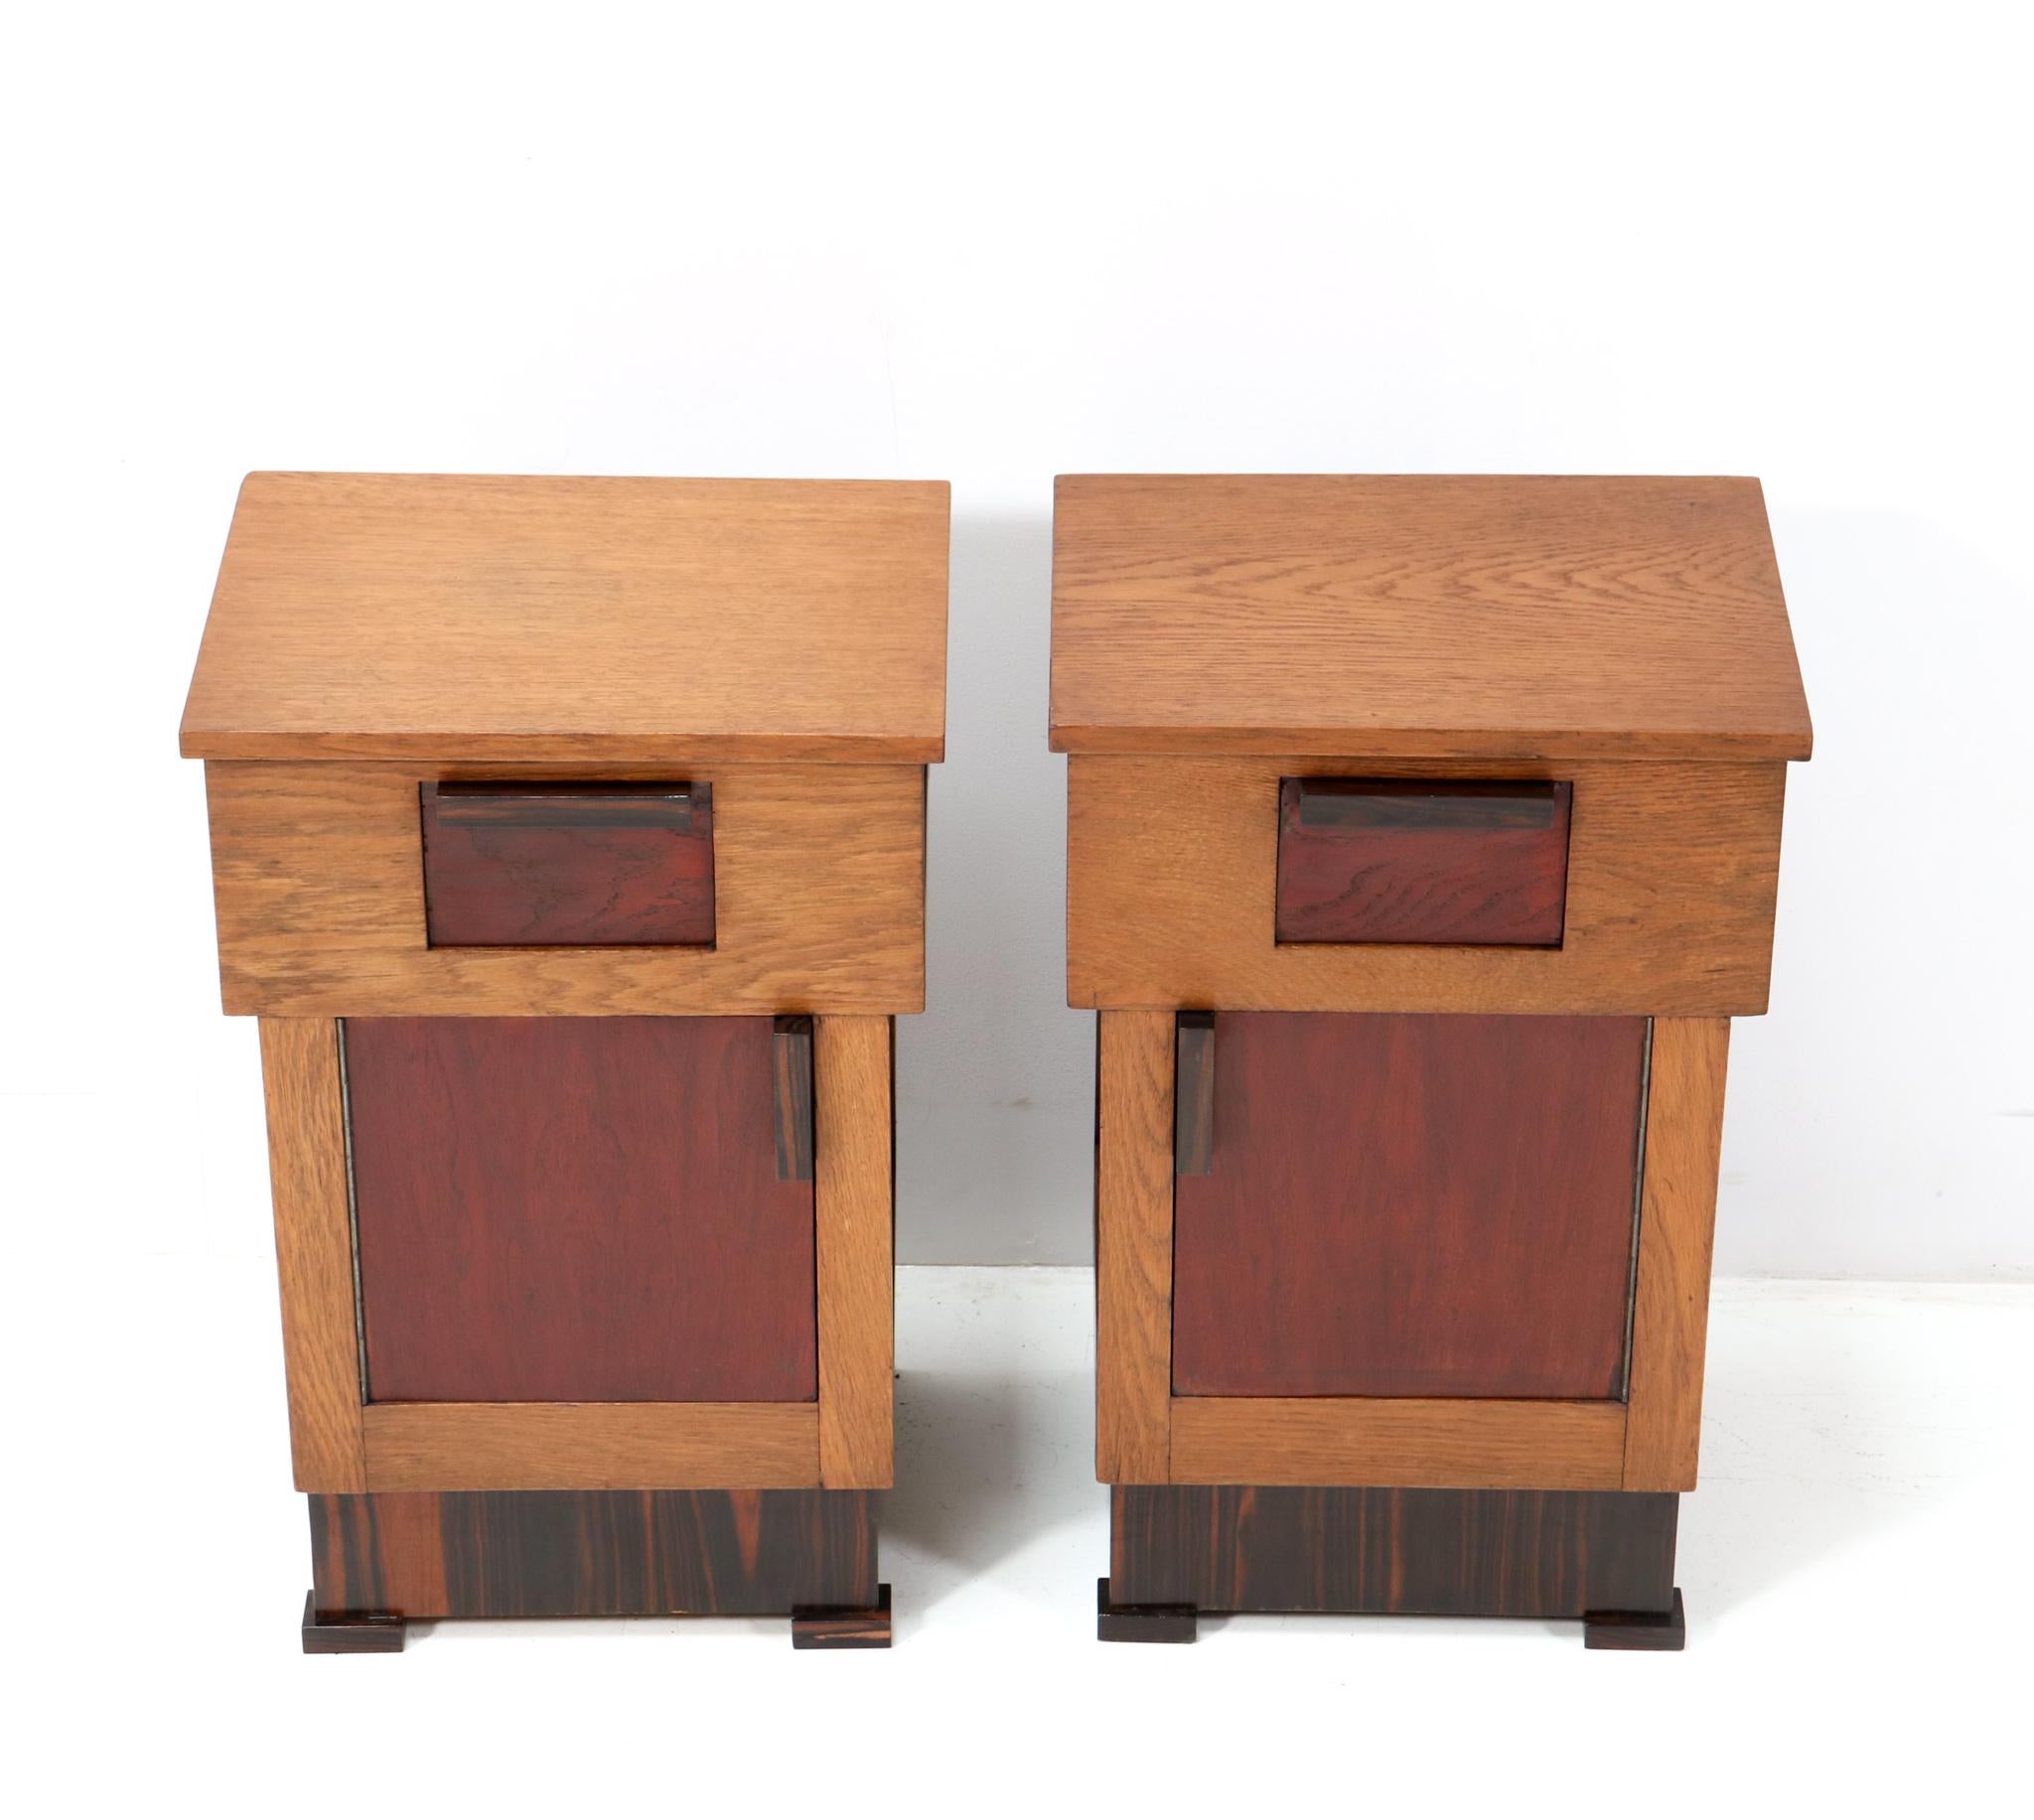 Magnificent and rare pair of Art Deco Modernist nightstands or bedside tables.
Striking Dutch design from the 1920s.
Solid oak with original solid macassar ebony handles on the drawers and doors.
The drawers and doors are veneered with original